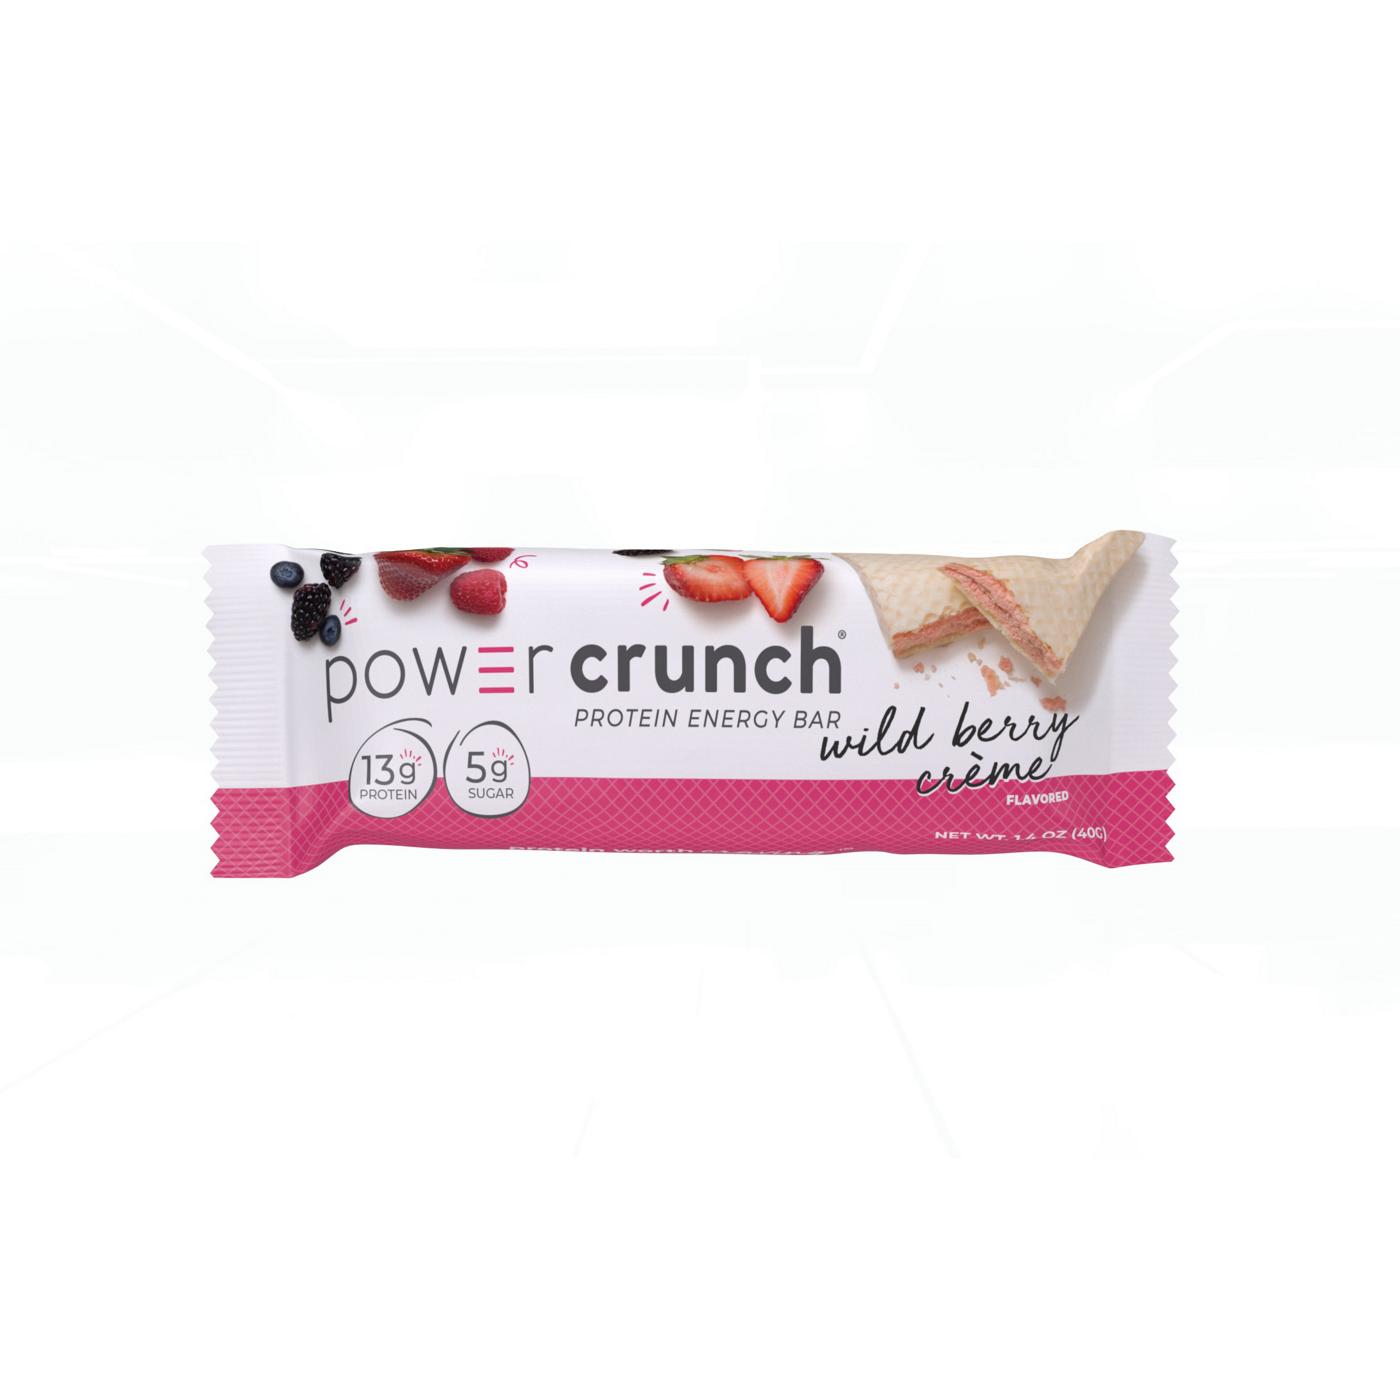 Power Crunch 13g Protein Energy Bar - Wild Berry Crème; image 1 of 2